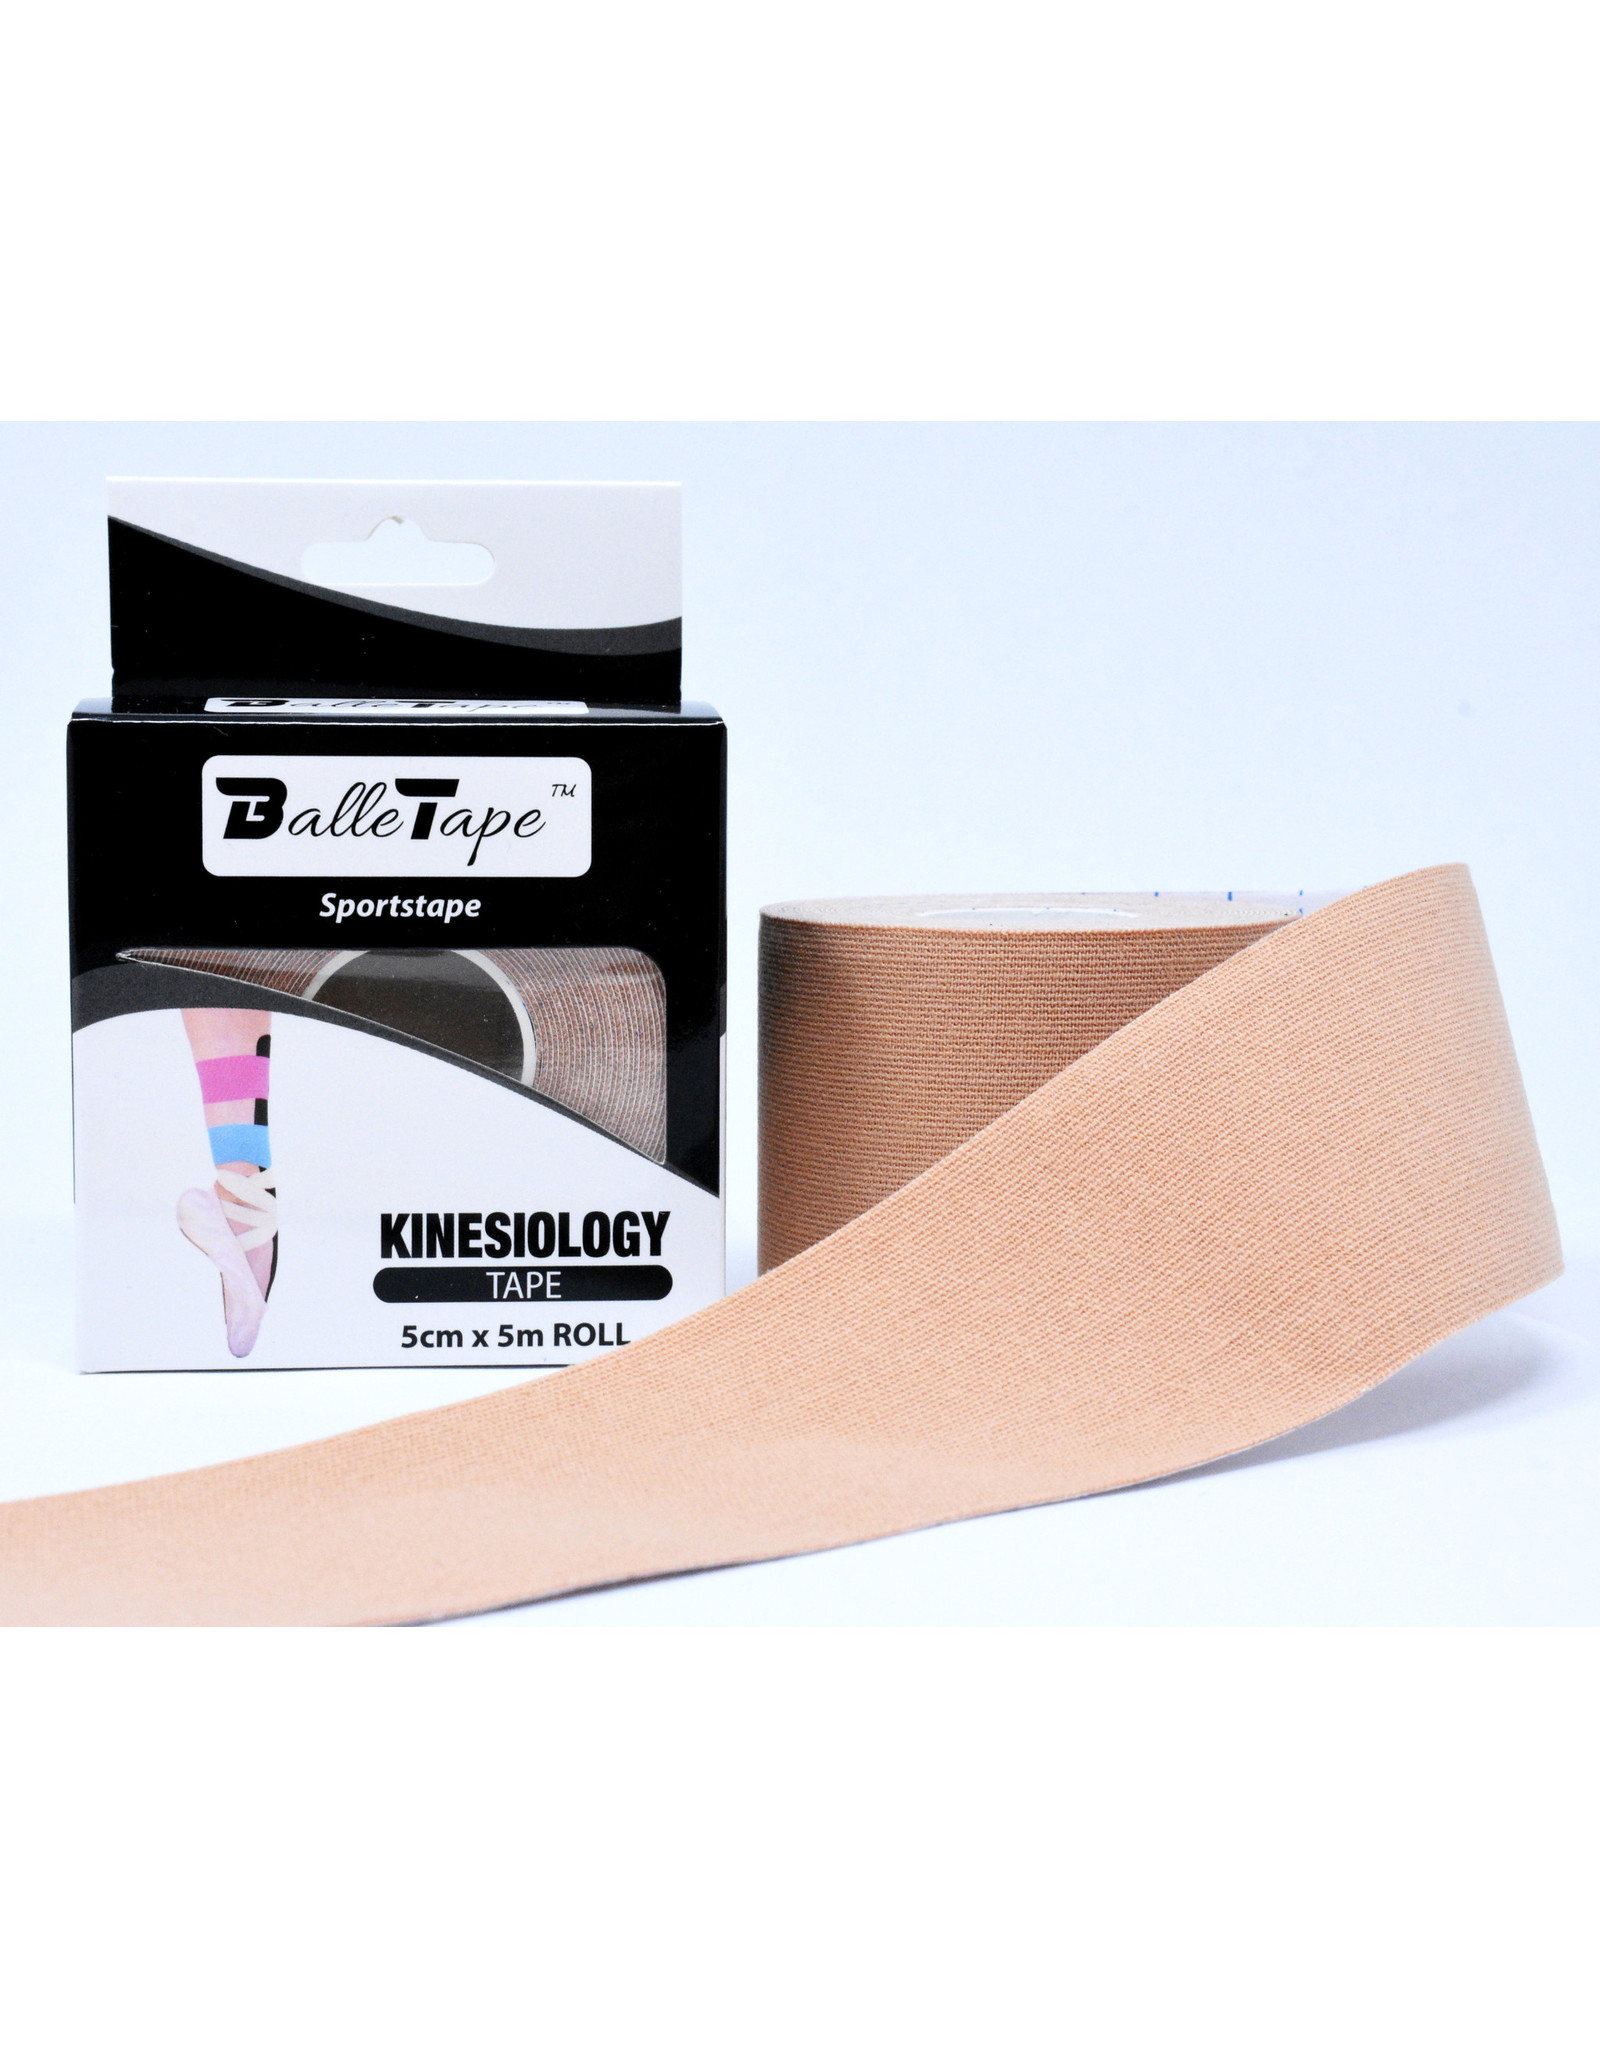 Superior Stretch Ballet Tape - Kinesiology Tape